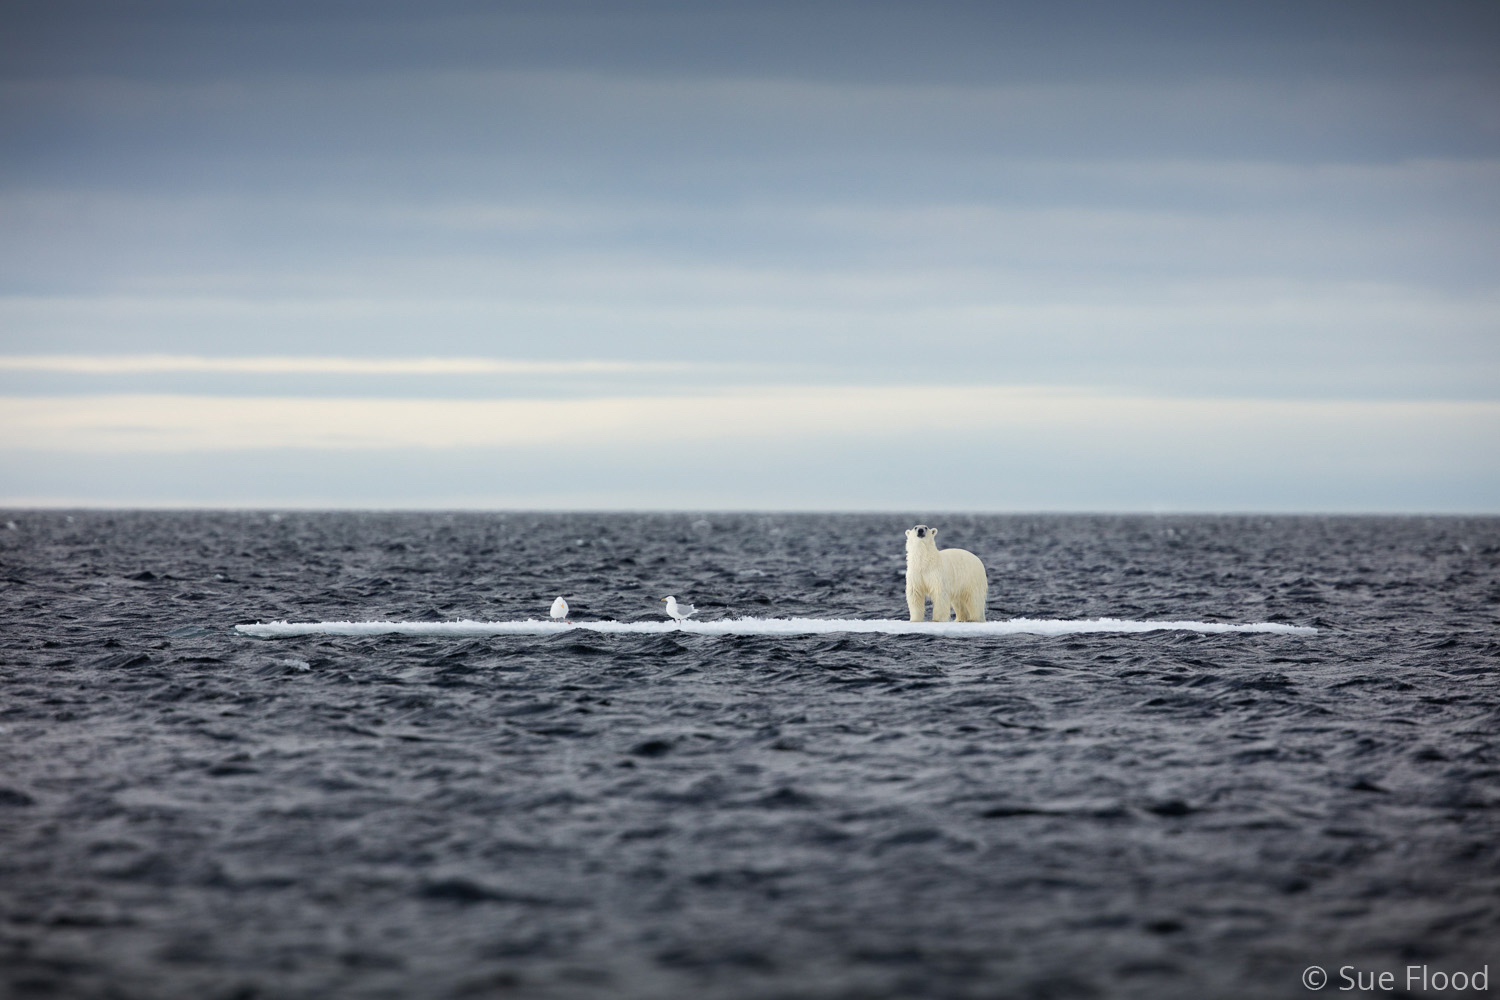 Polar bear on Thin Ice - Science Photographer of the Year - Climate Change runner-up 2021